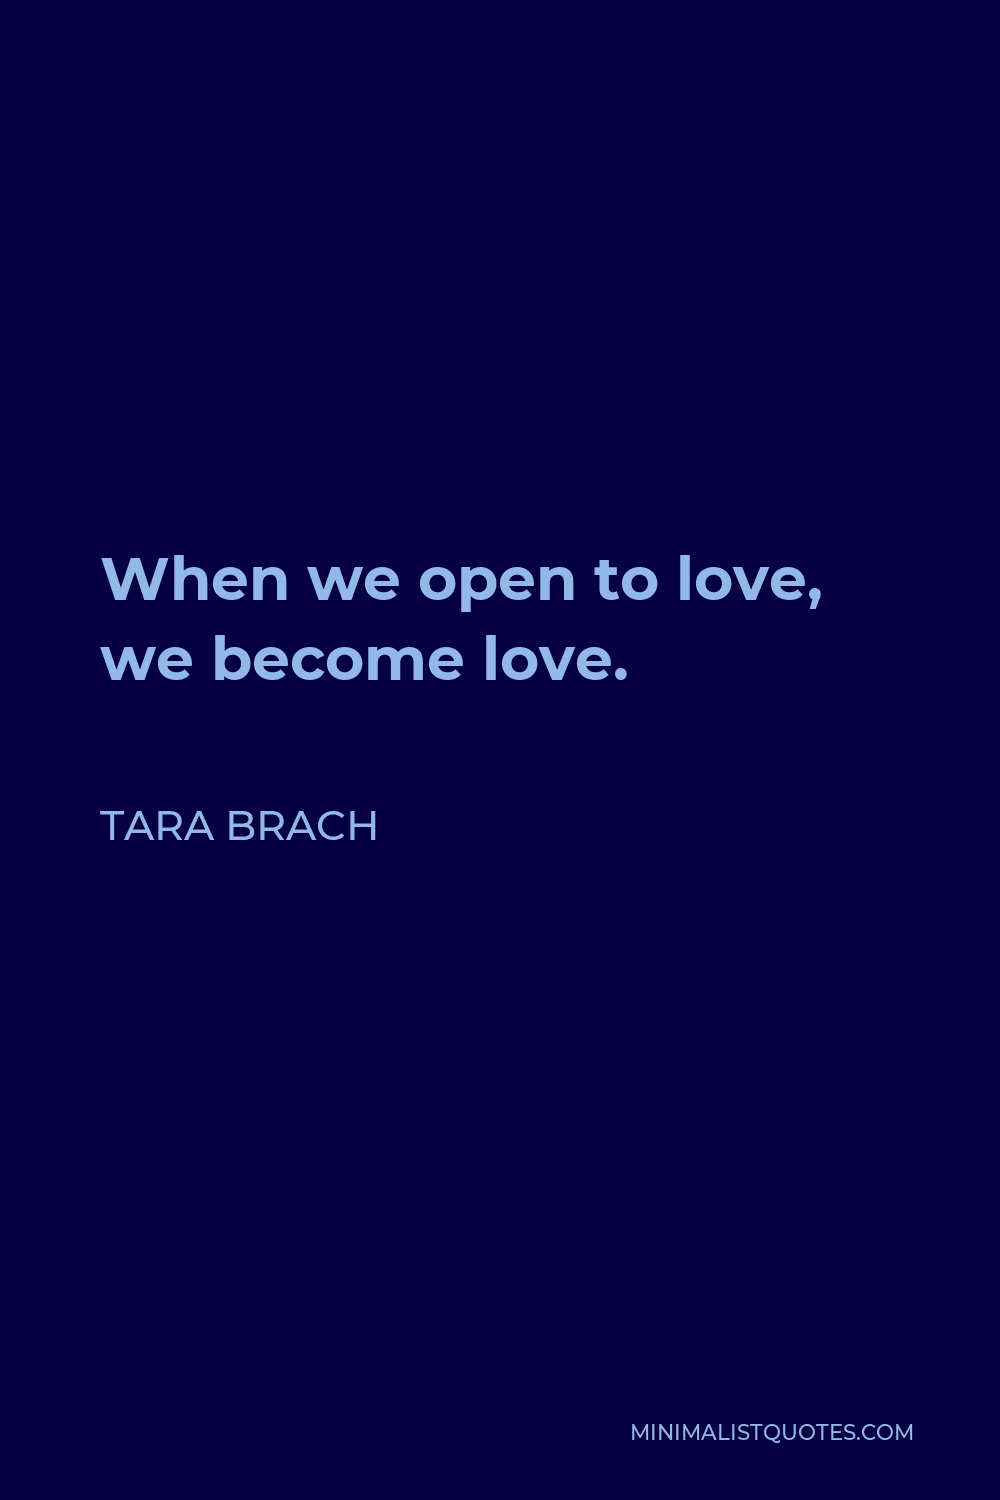 Tara Brach Quote - When we open to love, we become love.